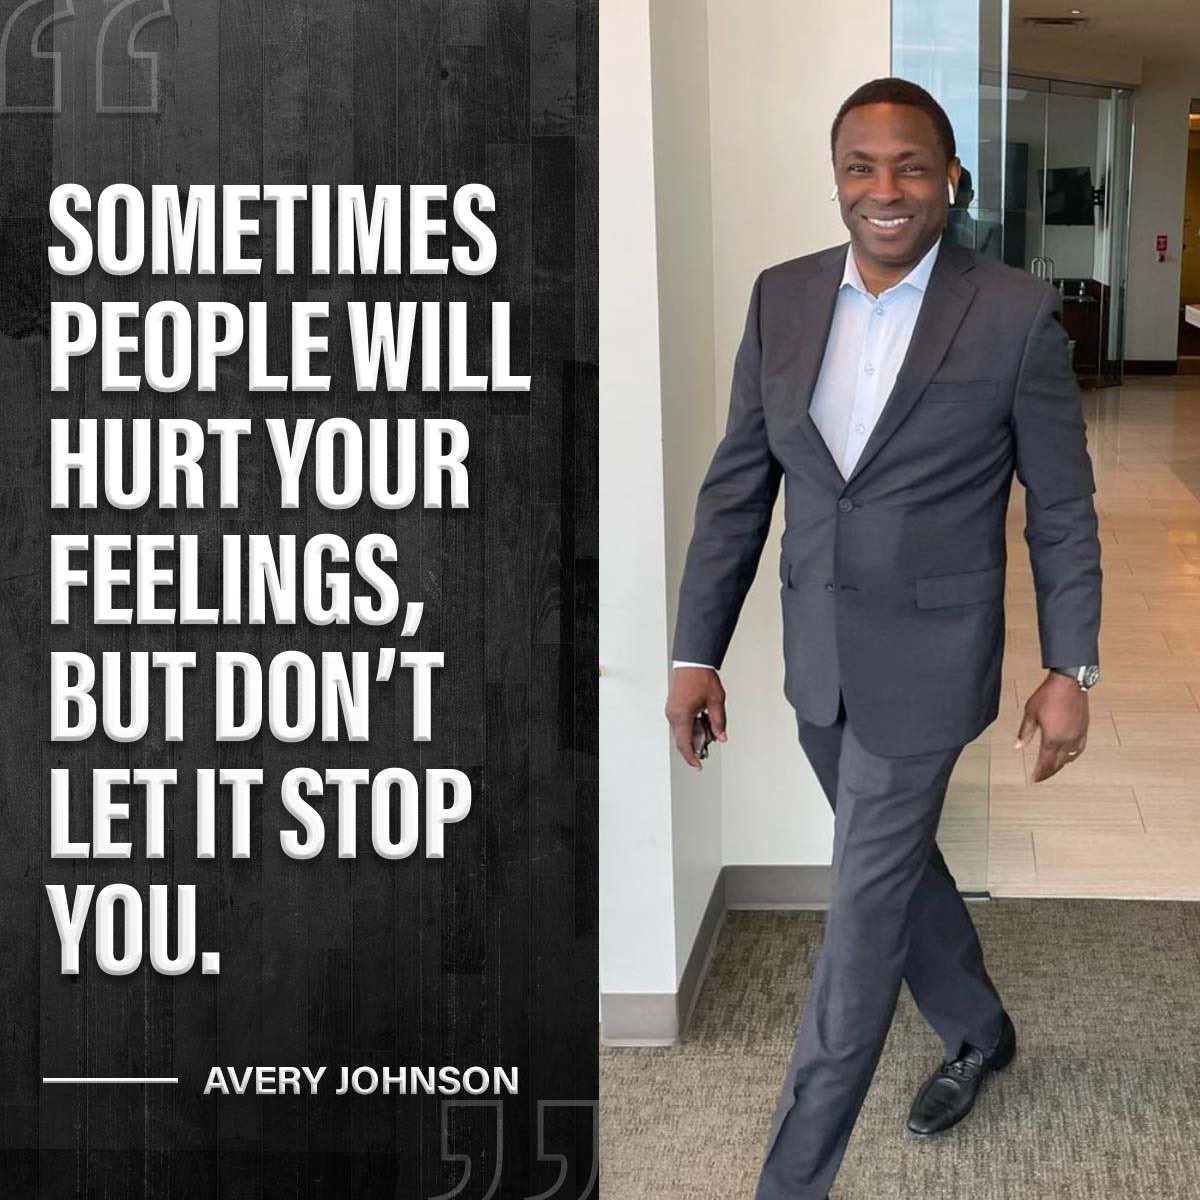 Encountering hurtful actions or words is normal. Instead of letting them hinder you, stay focused on your goals. Don't let setbacks or negativity deter you from pursuing your aspirations. #CoachAvery #StayFocused #KeepPushingForward